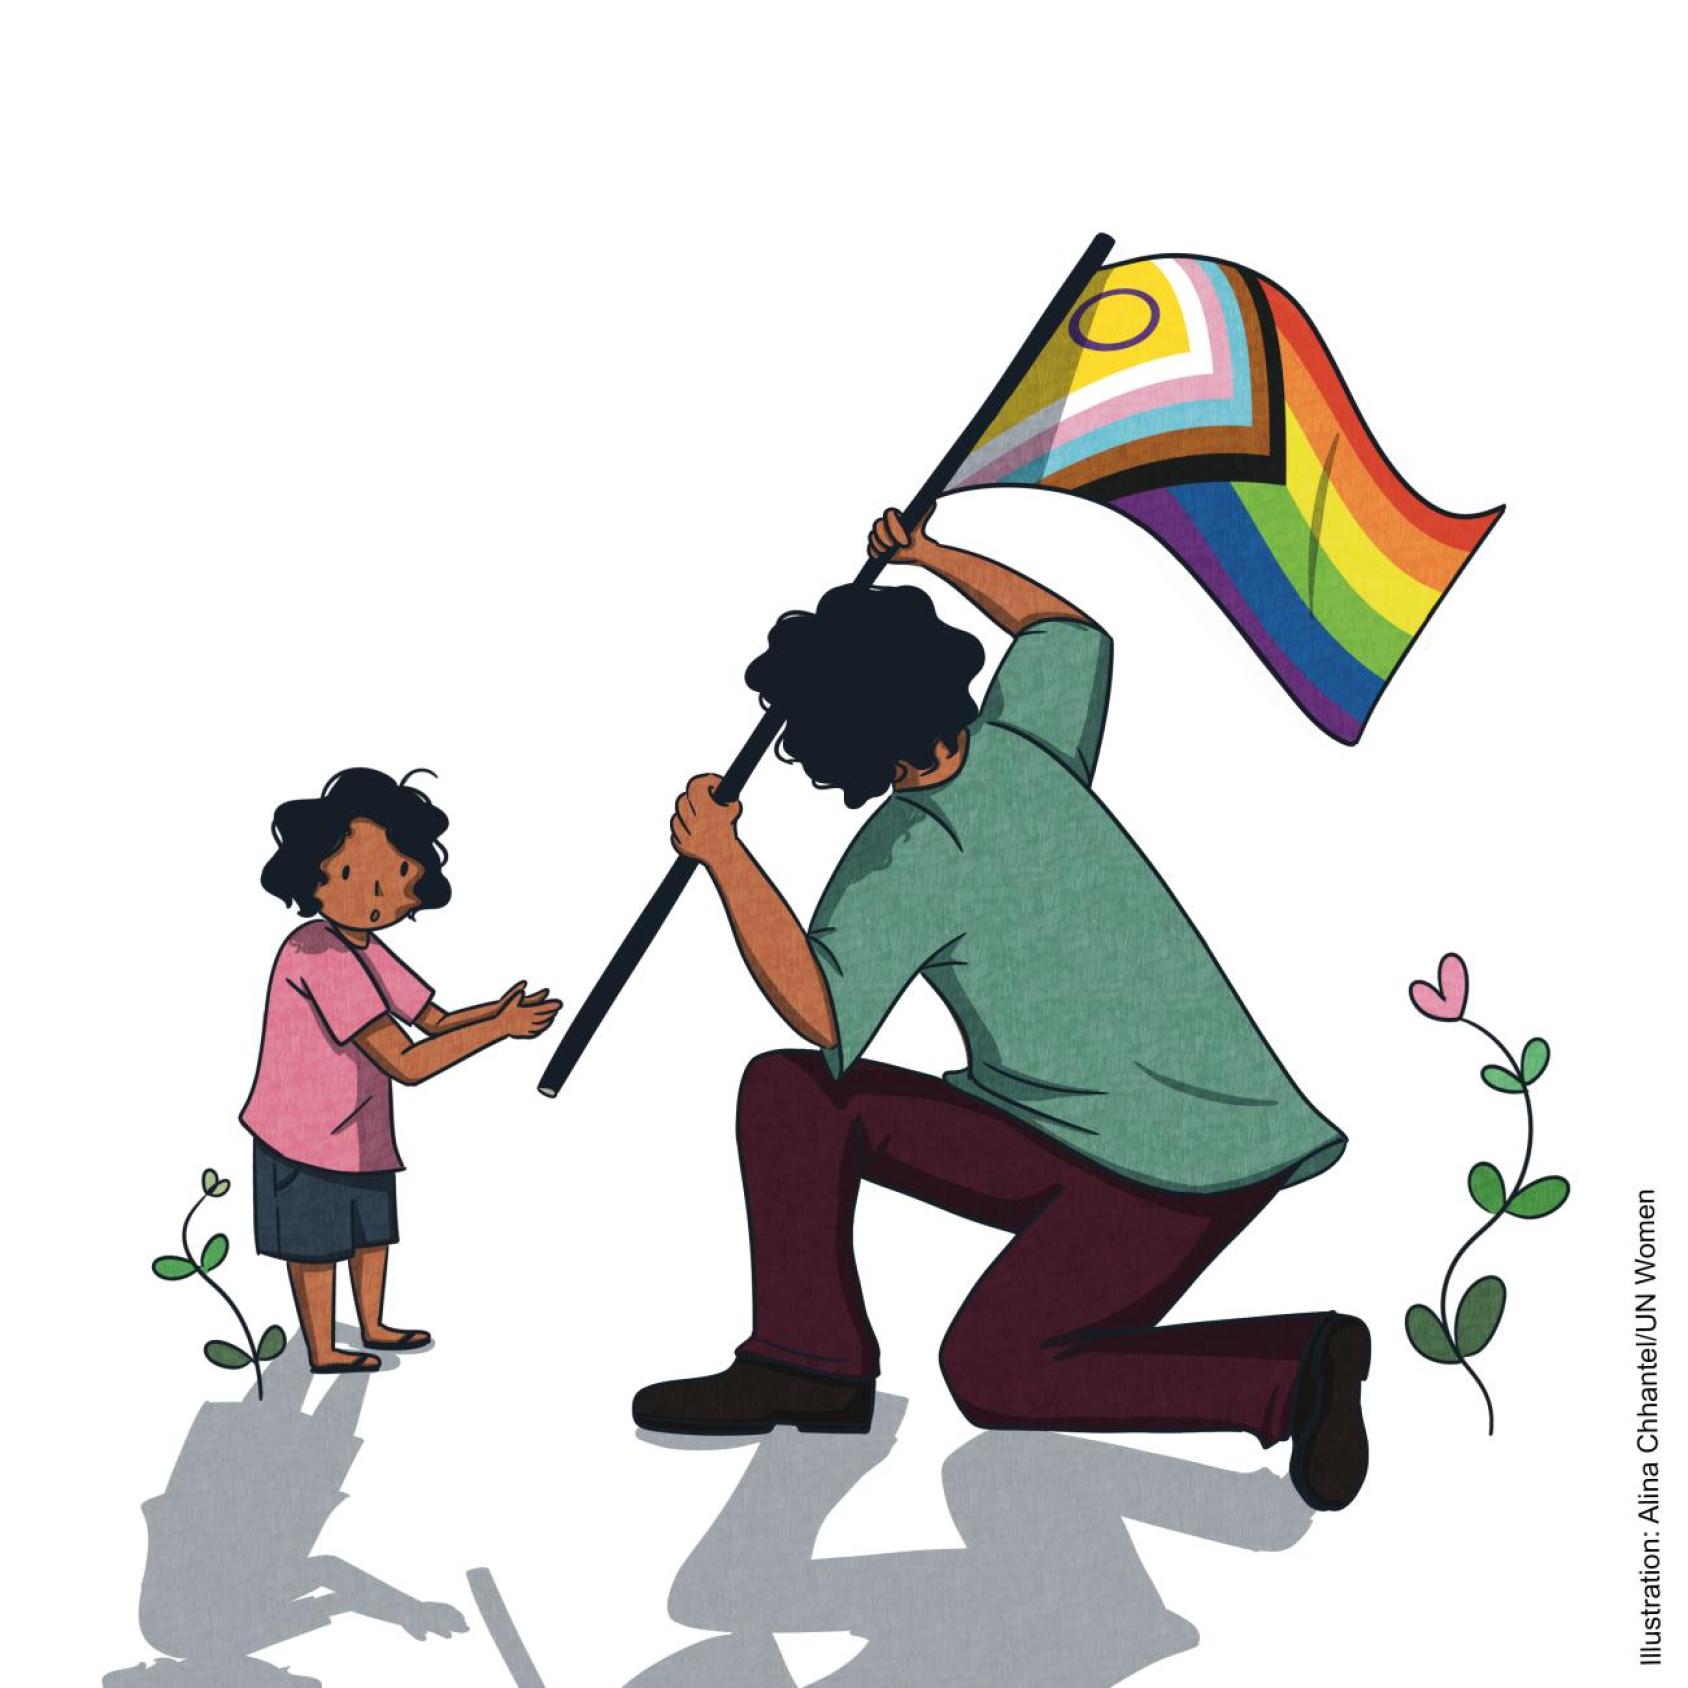 An illustration of a person in a green shirt carrying a rainbow flag and passing it on to a child in a pink dress